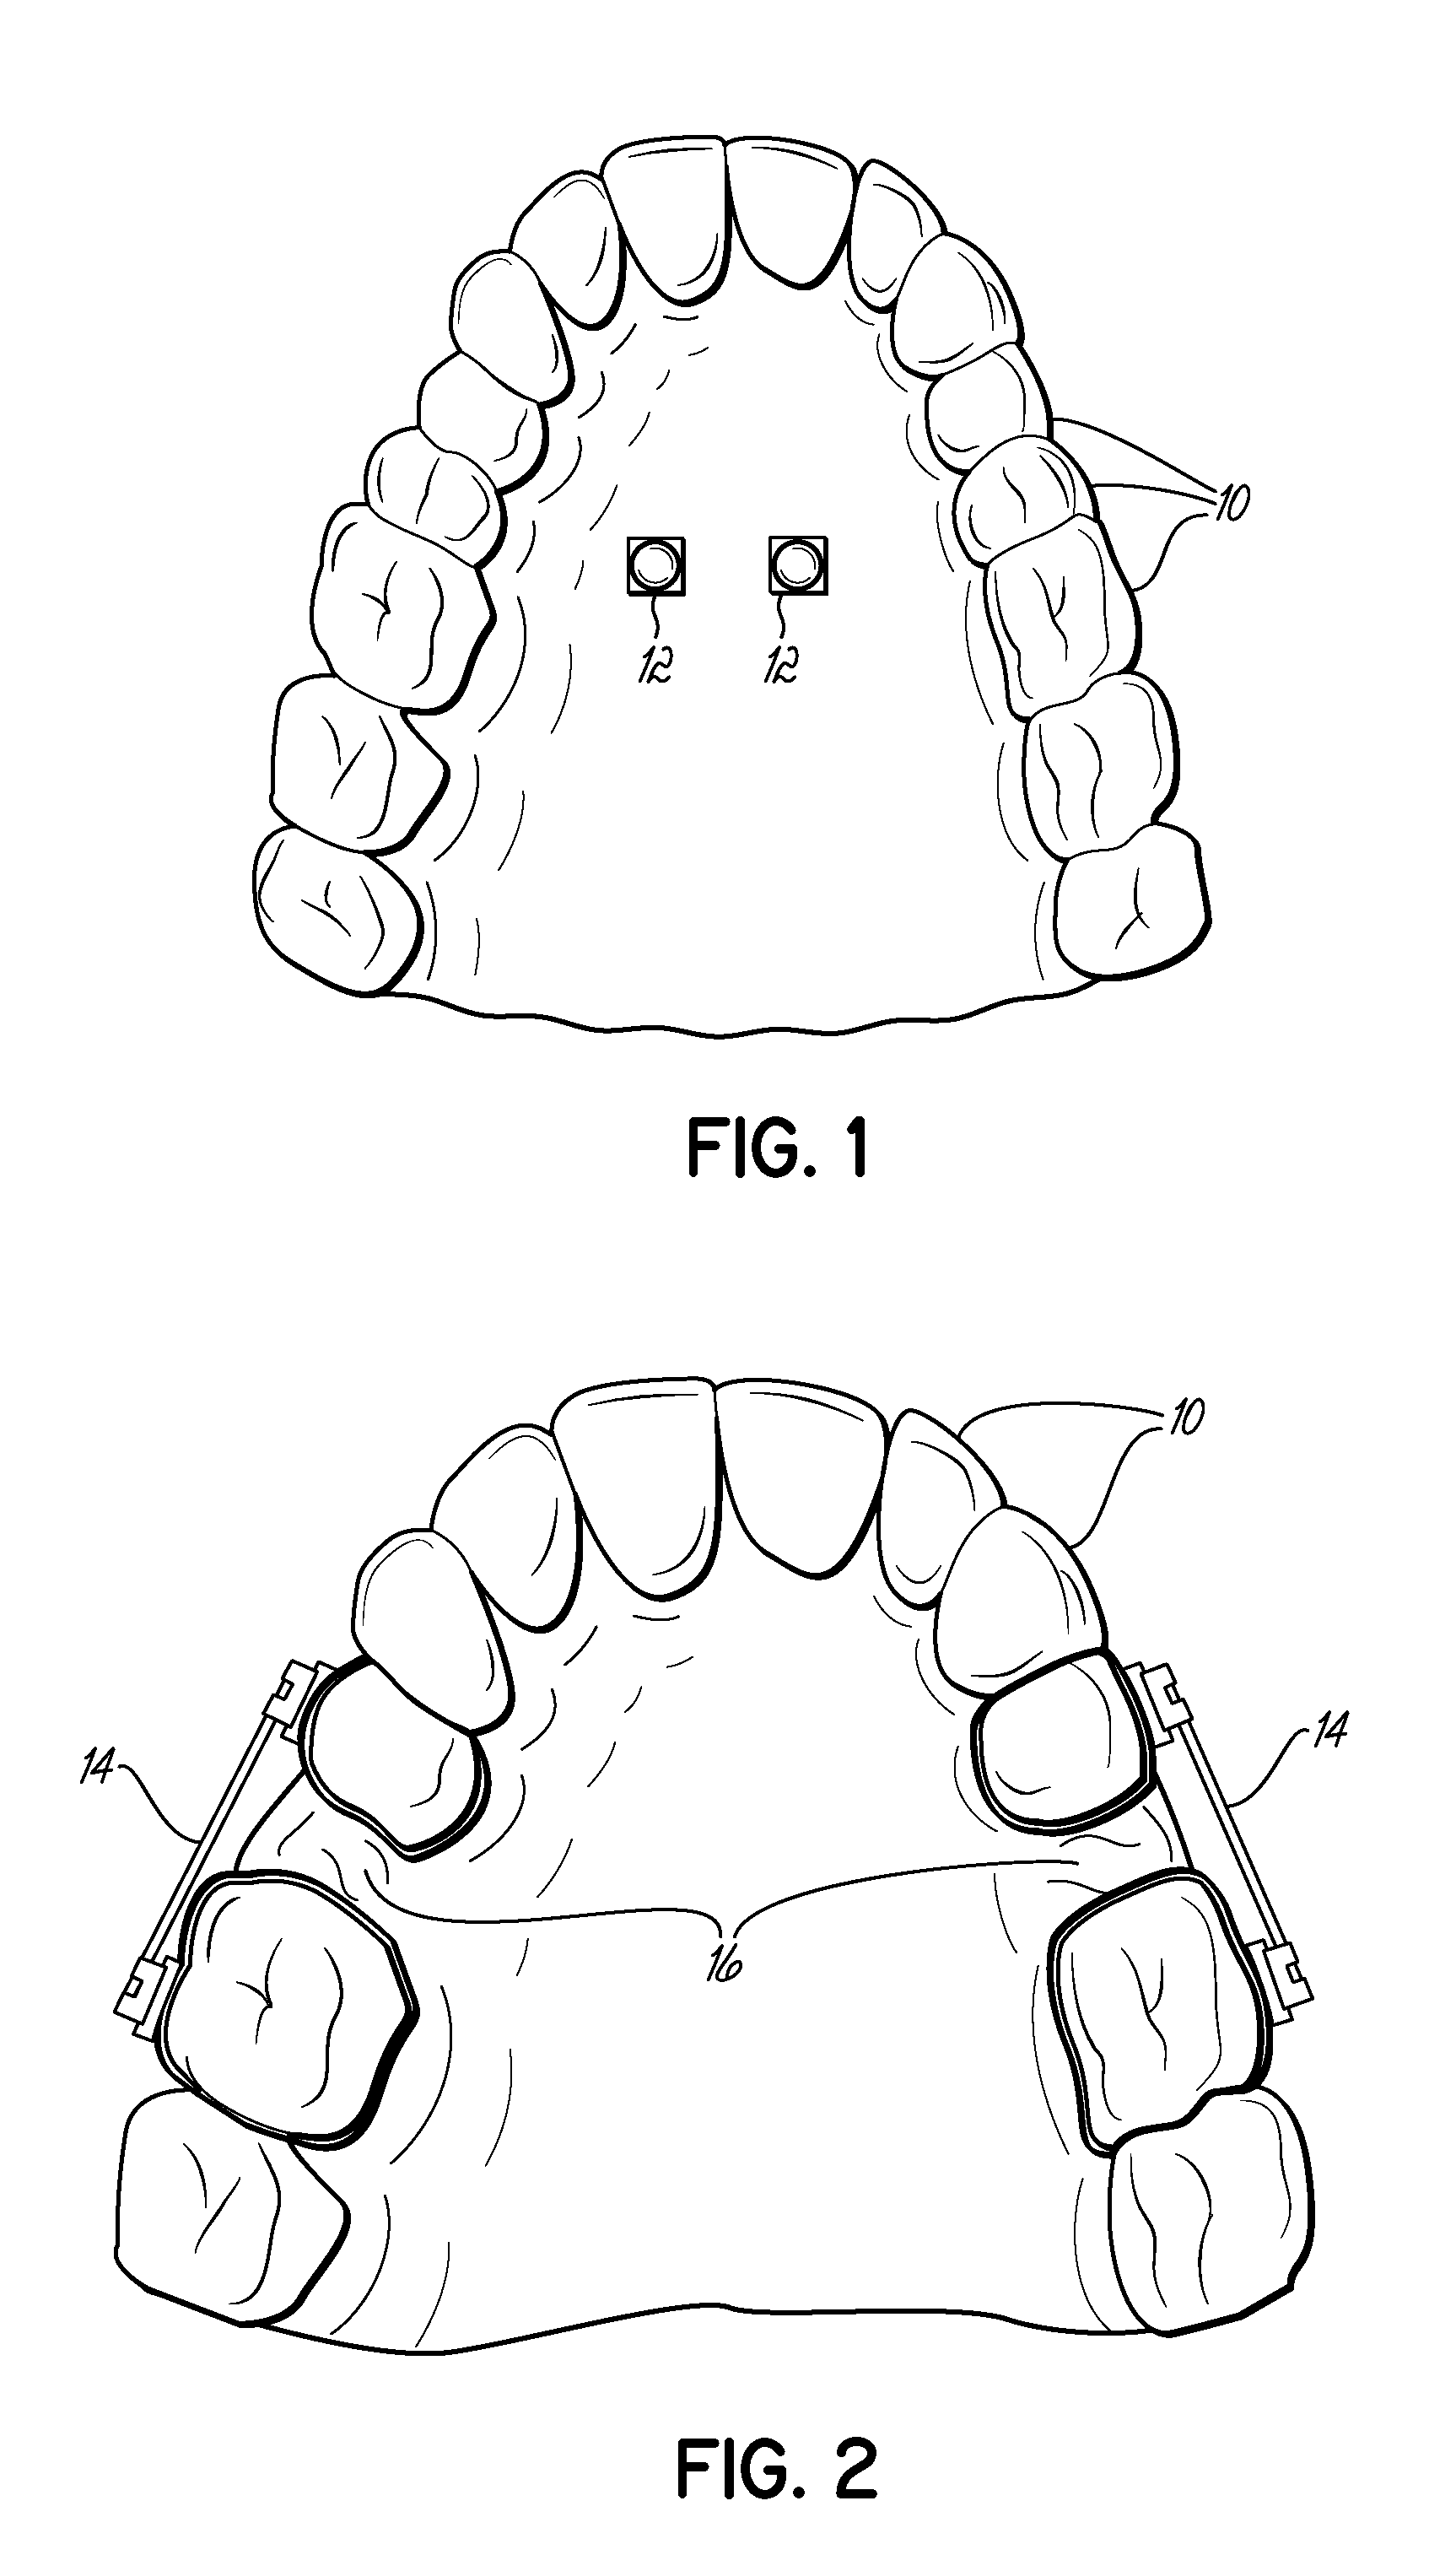 Fabricating custom extensions to thermoformed aligners